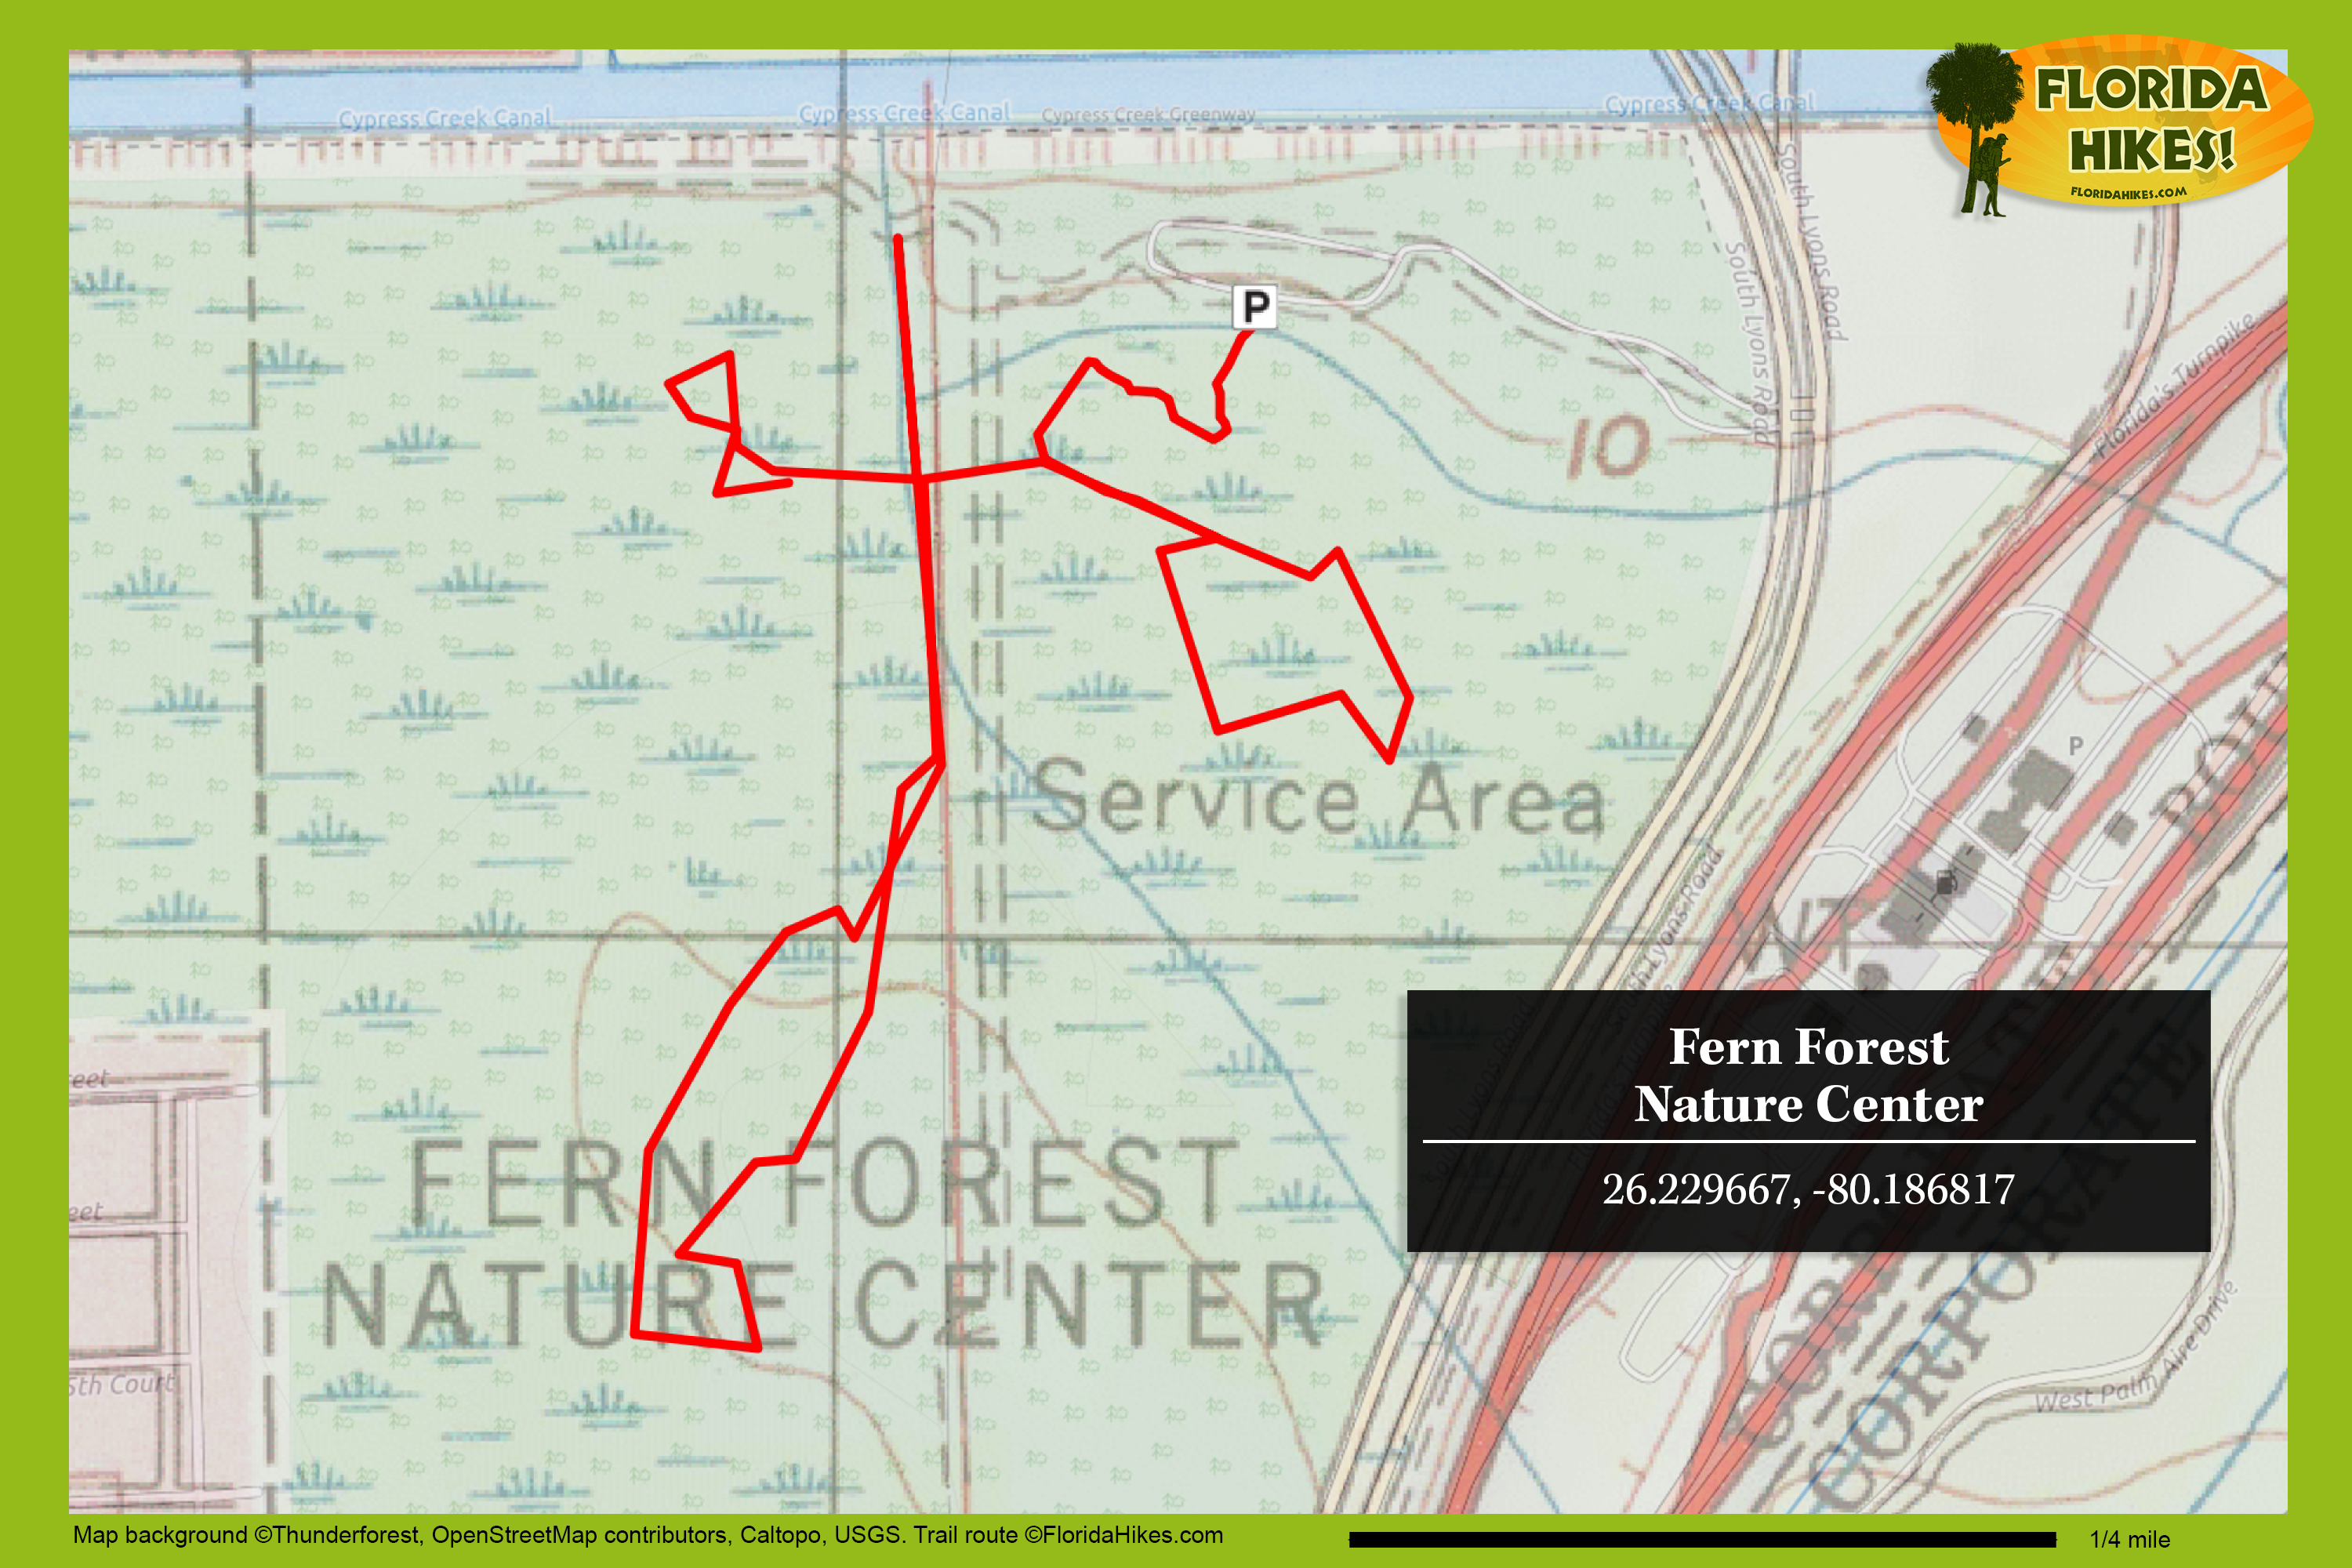 Fern Forest Nature Center | Florida Hikes! - Florida Trail Maps Download